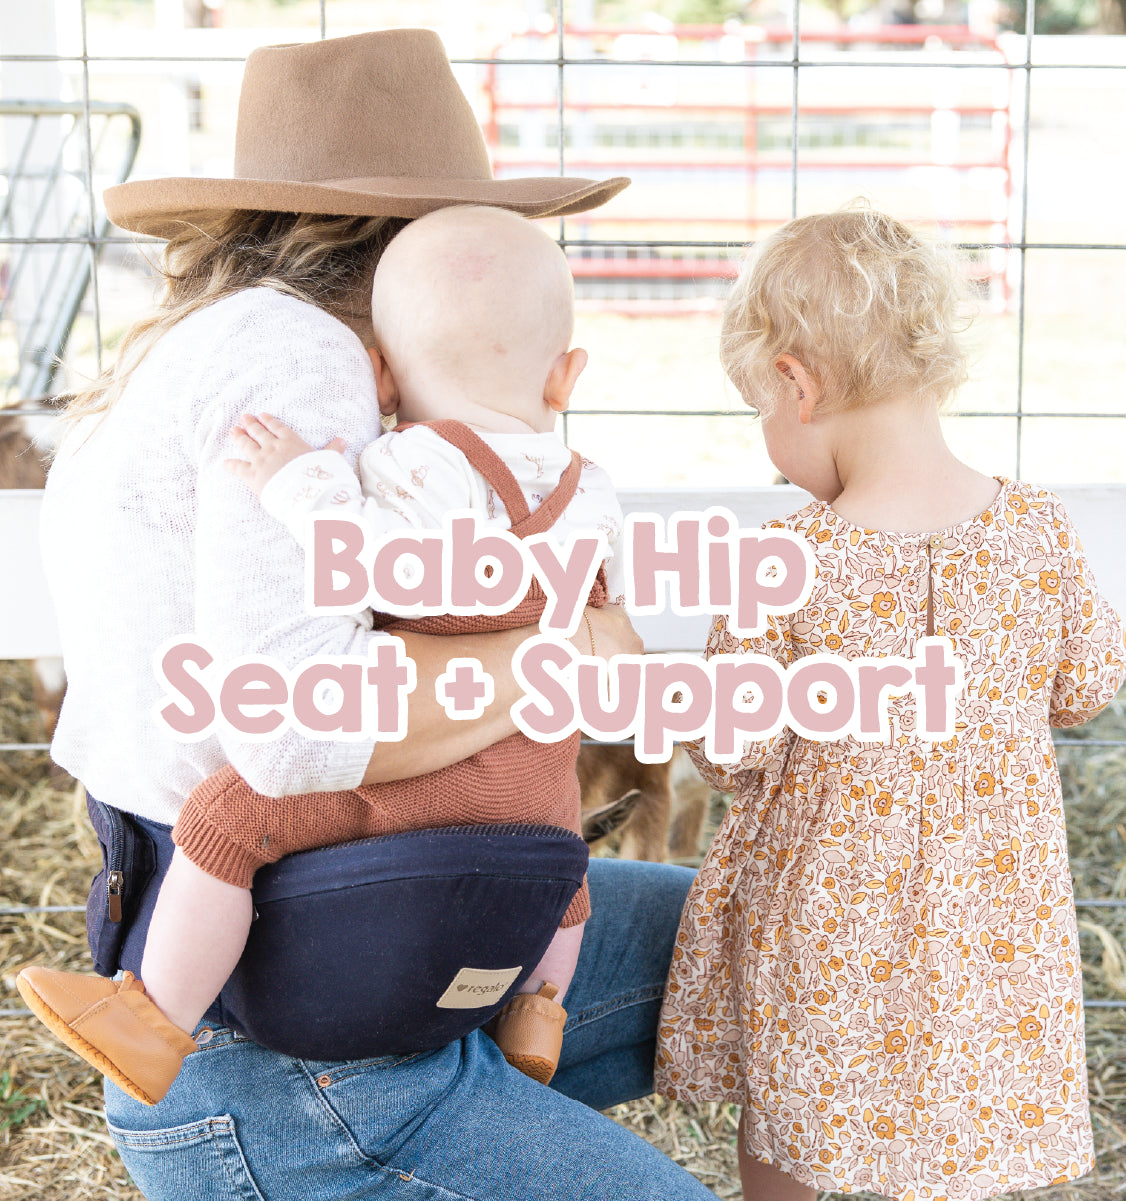 Baby hip seat +support